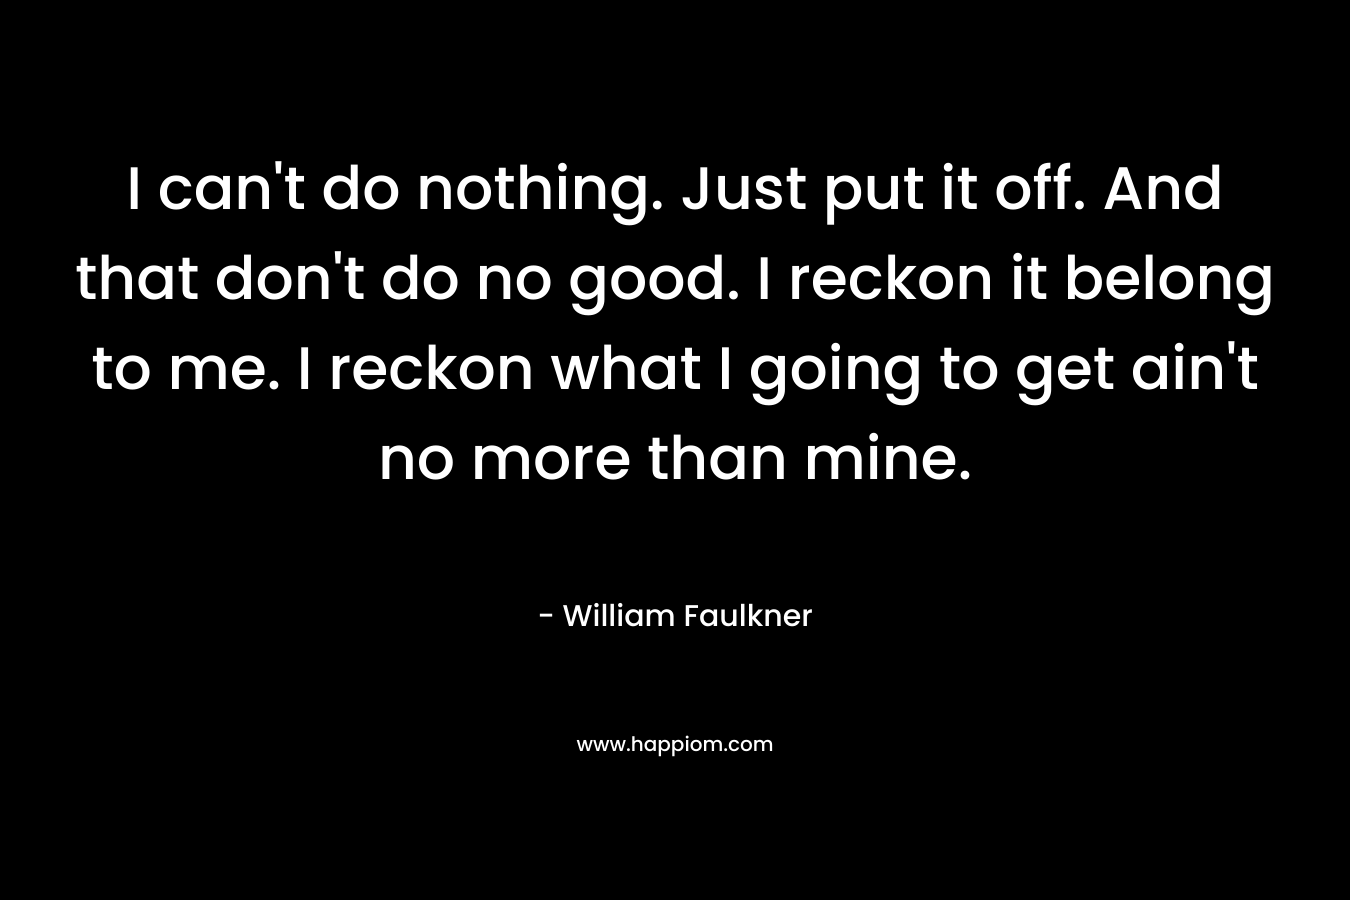 I can’t do nothing. Just put it off. And that don’t do no good. I reckon it belong to me. I reckon what I going to get ain’t no more than mine. – William Faulkner